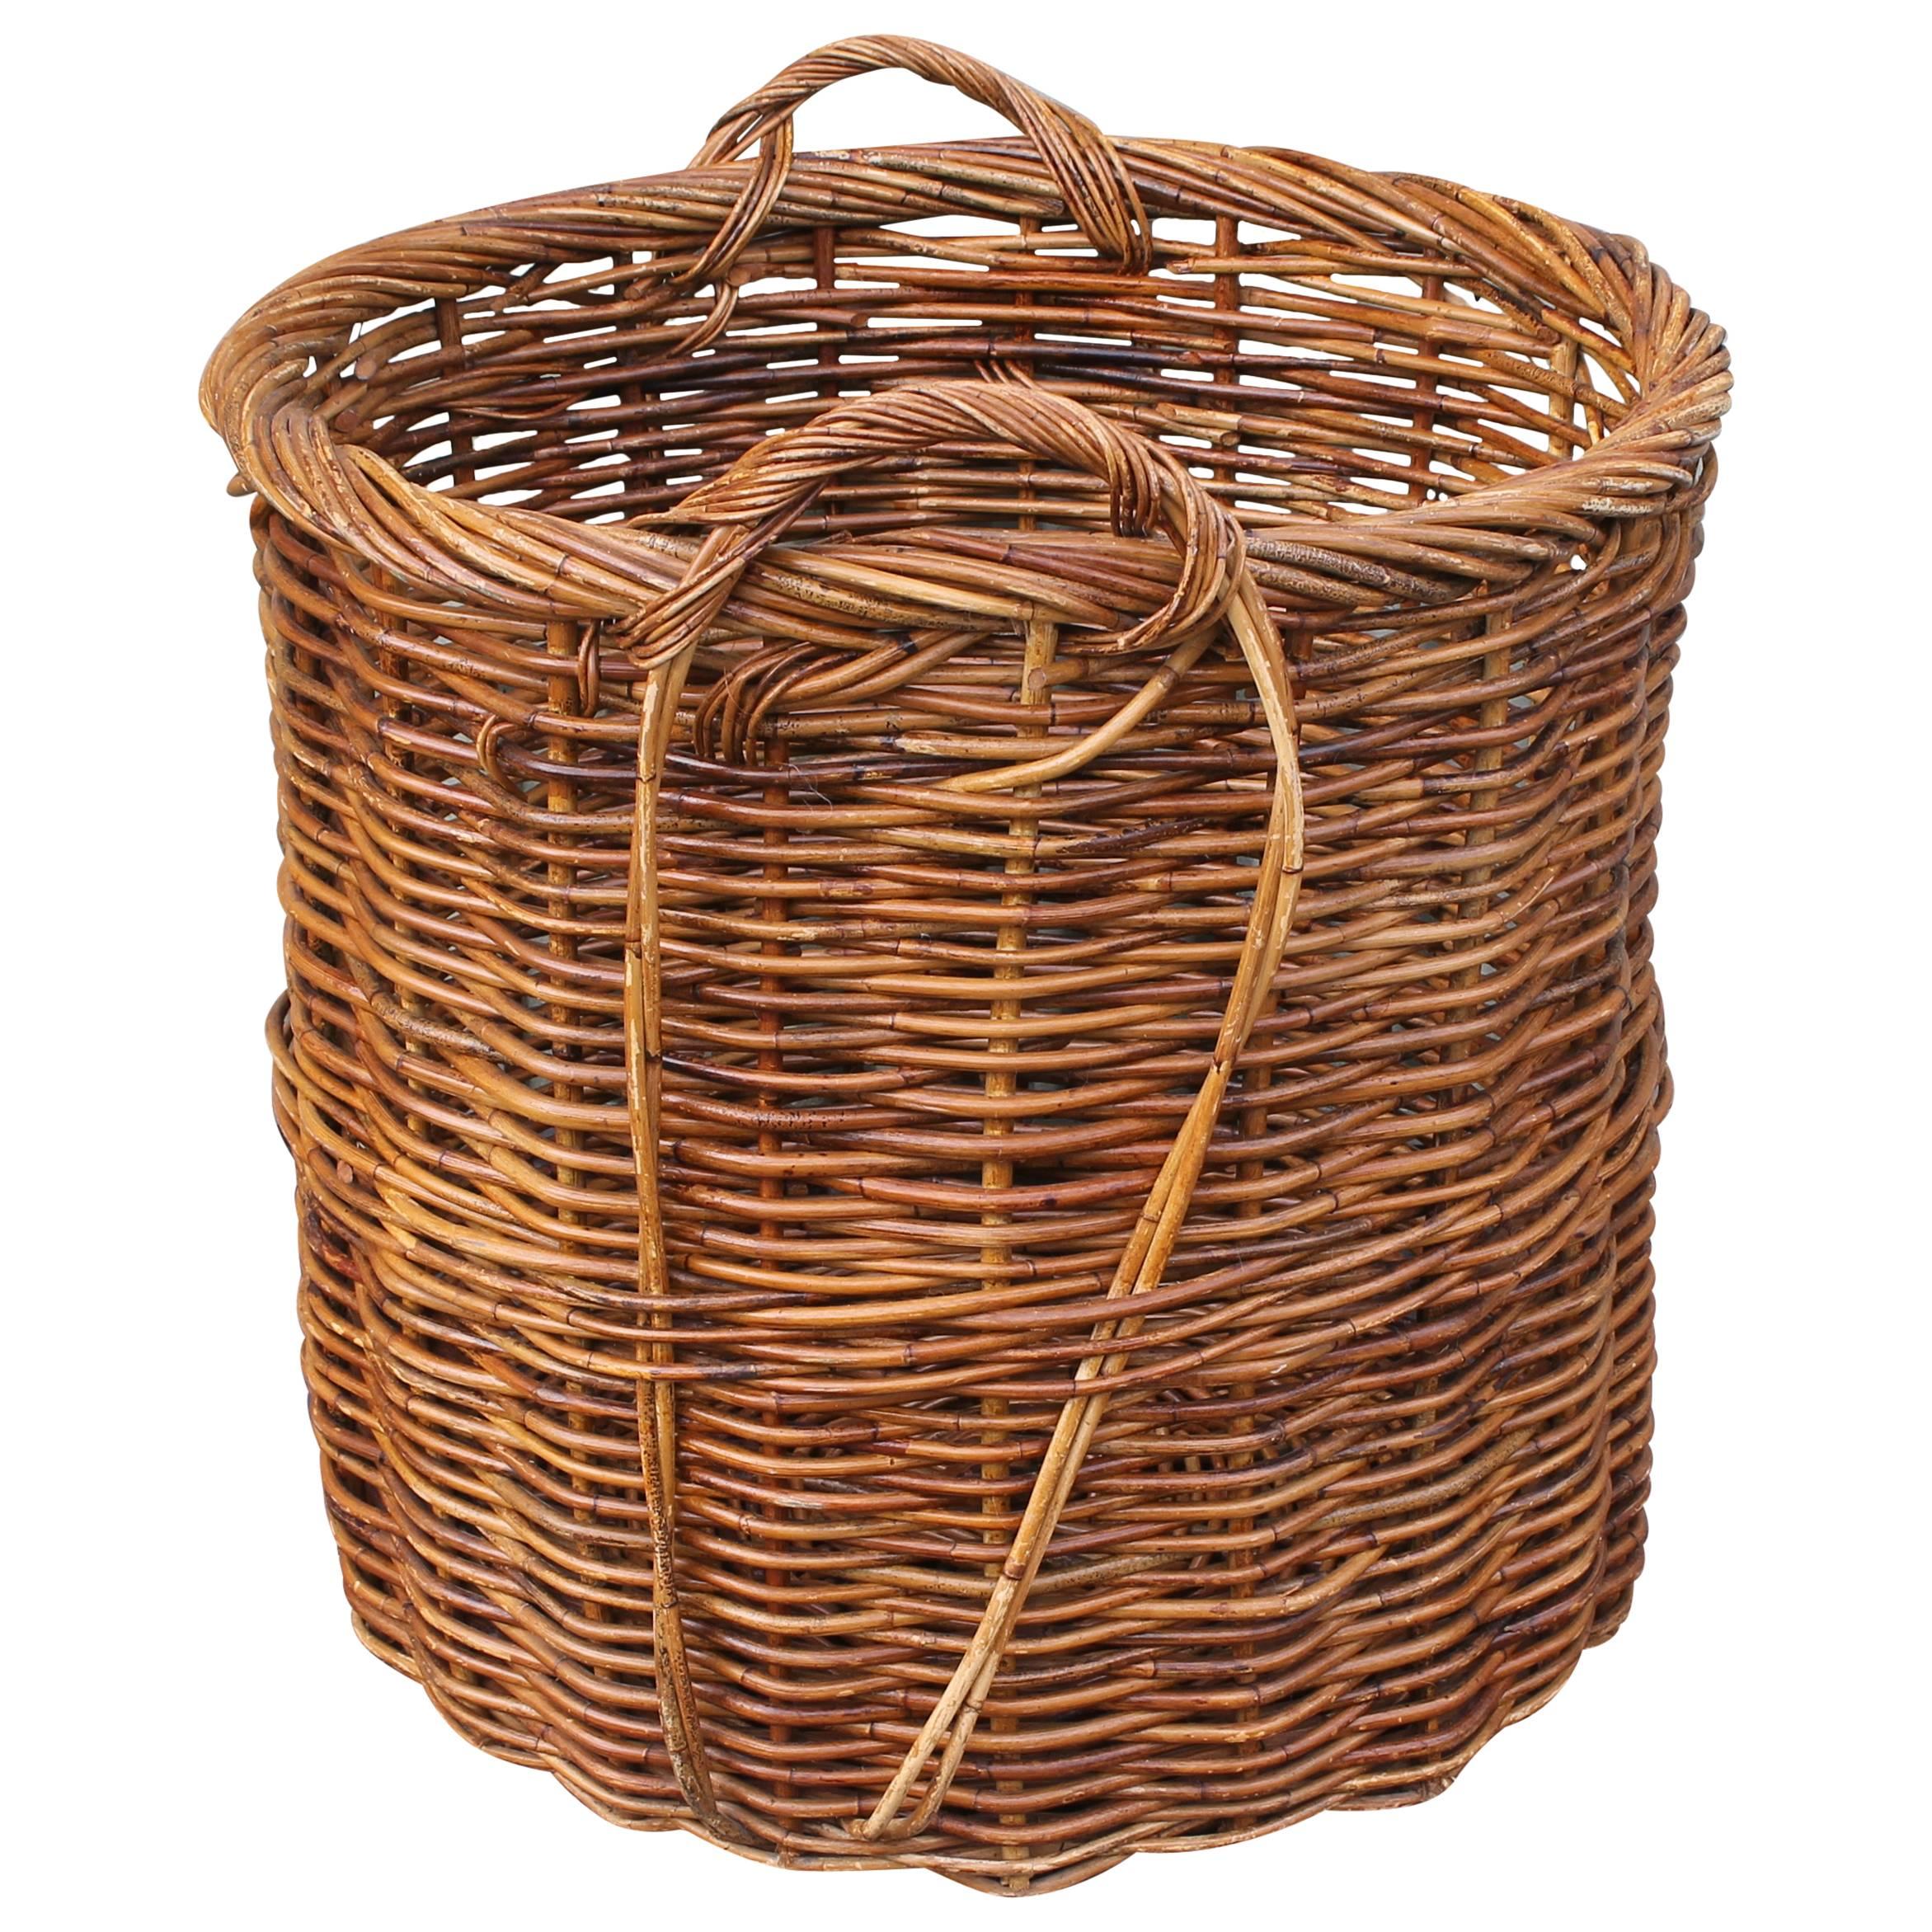 Monumental 19th Century Double Handled Field Basket